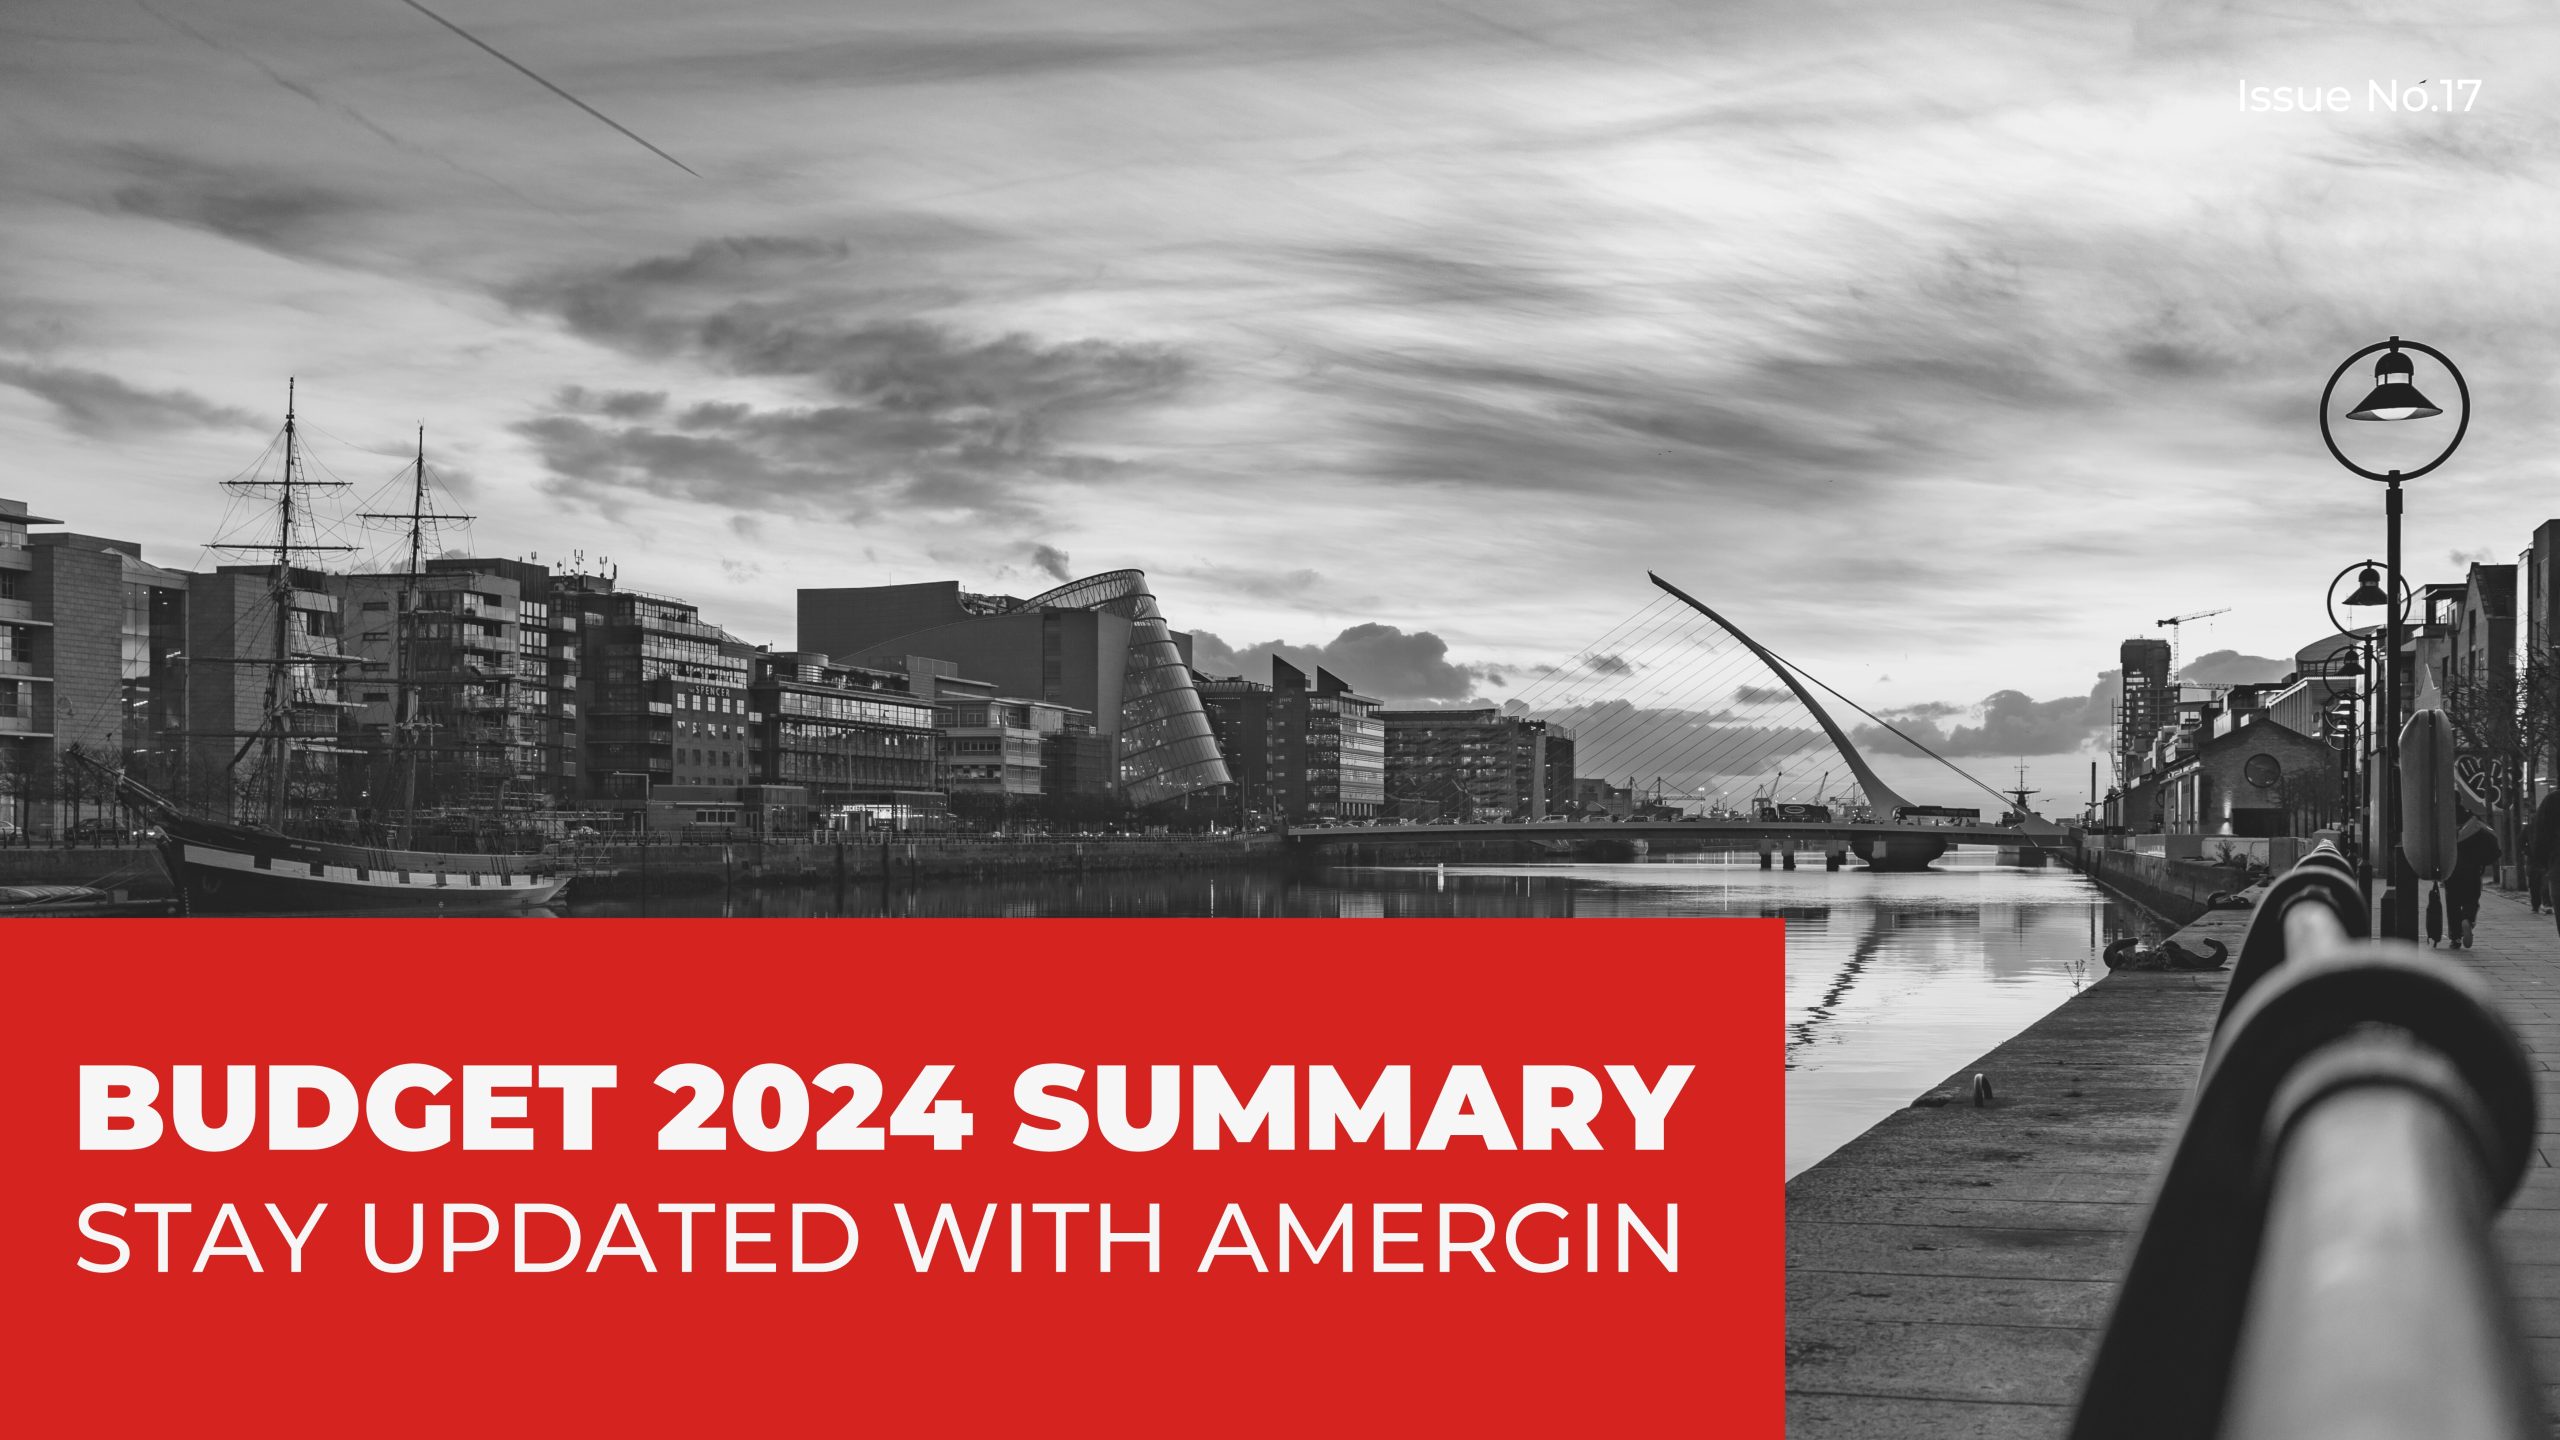 You are currently viewing BUDGET 2024 SUMMARY: STAY UPDATED WITH AMERGIN